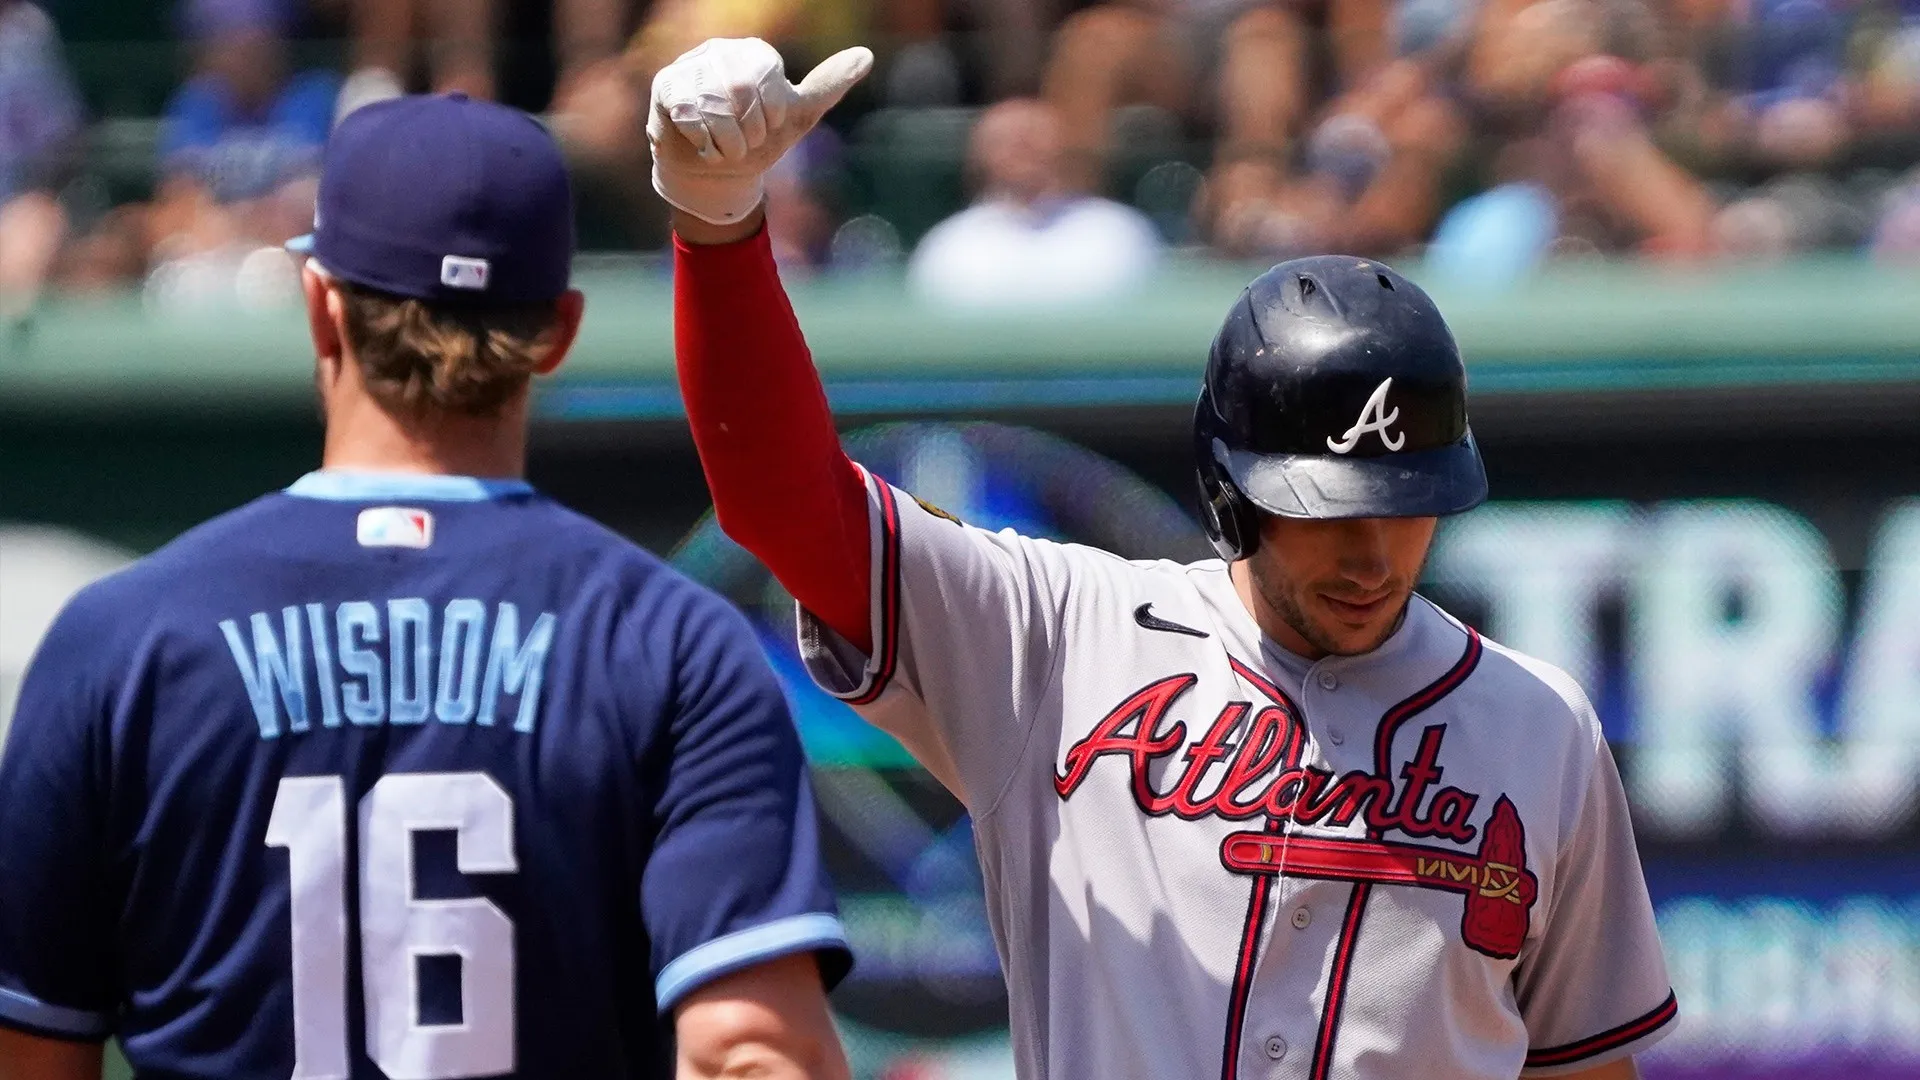 The Best and Worst Uniforms of All Time: The Atlanta Braves - NBC Sports